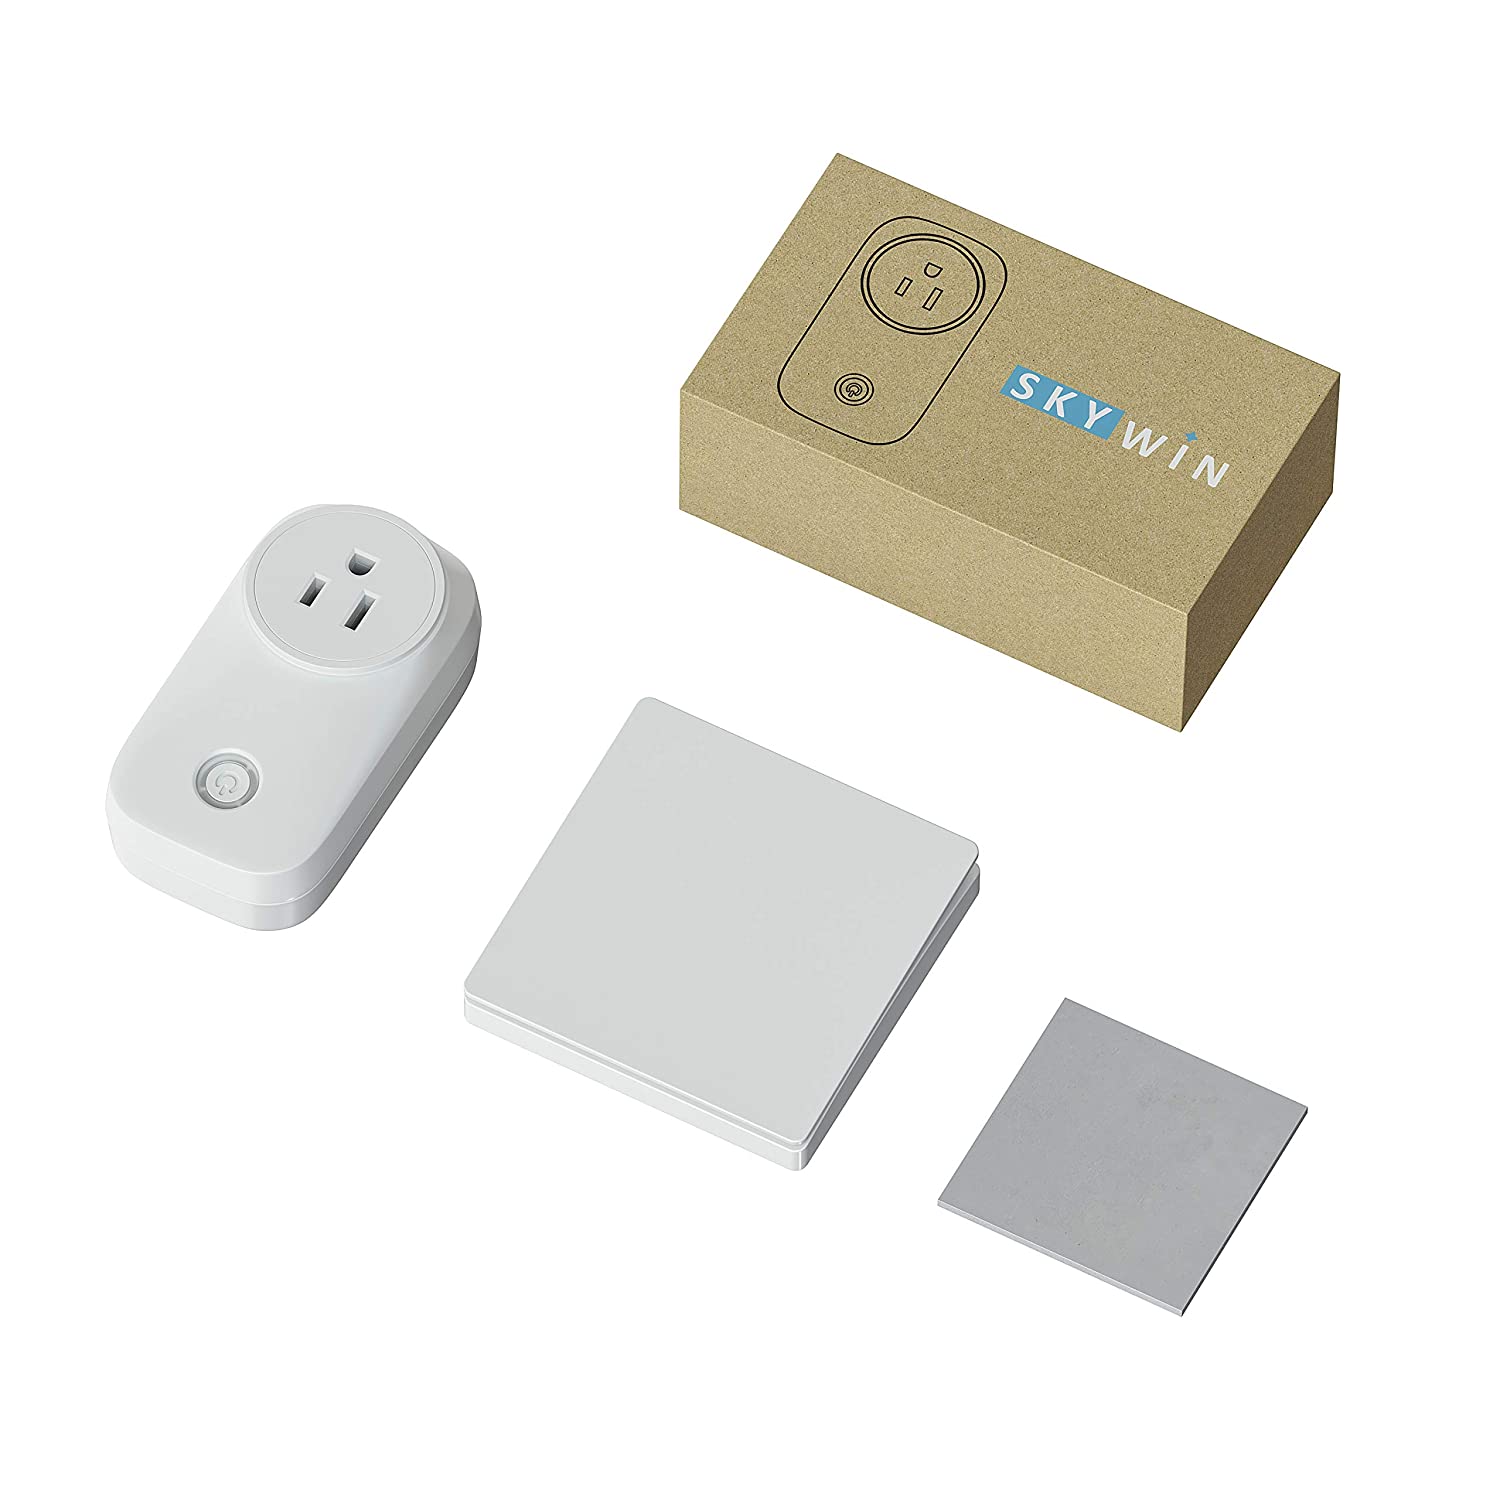 Skywin Wireless Outlet and Battery Free Kinetic Light Switch